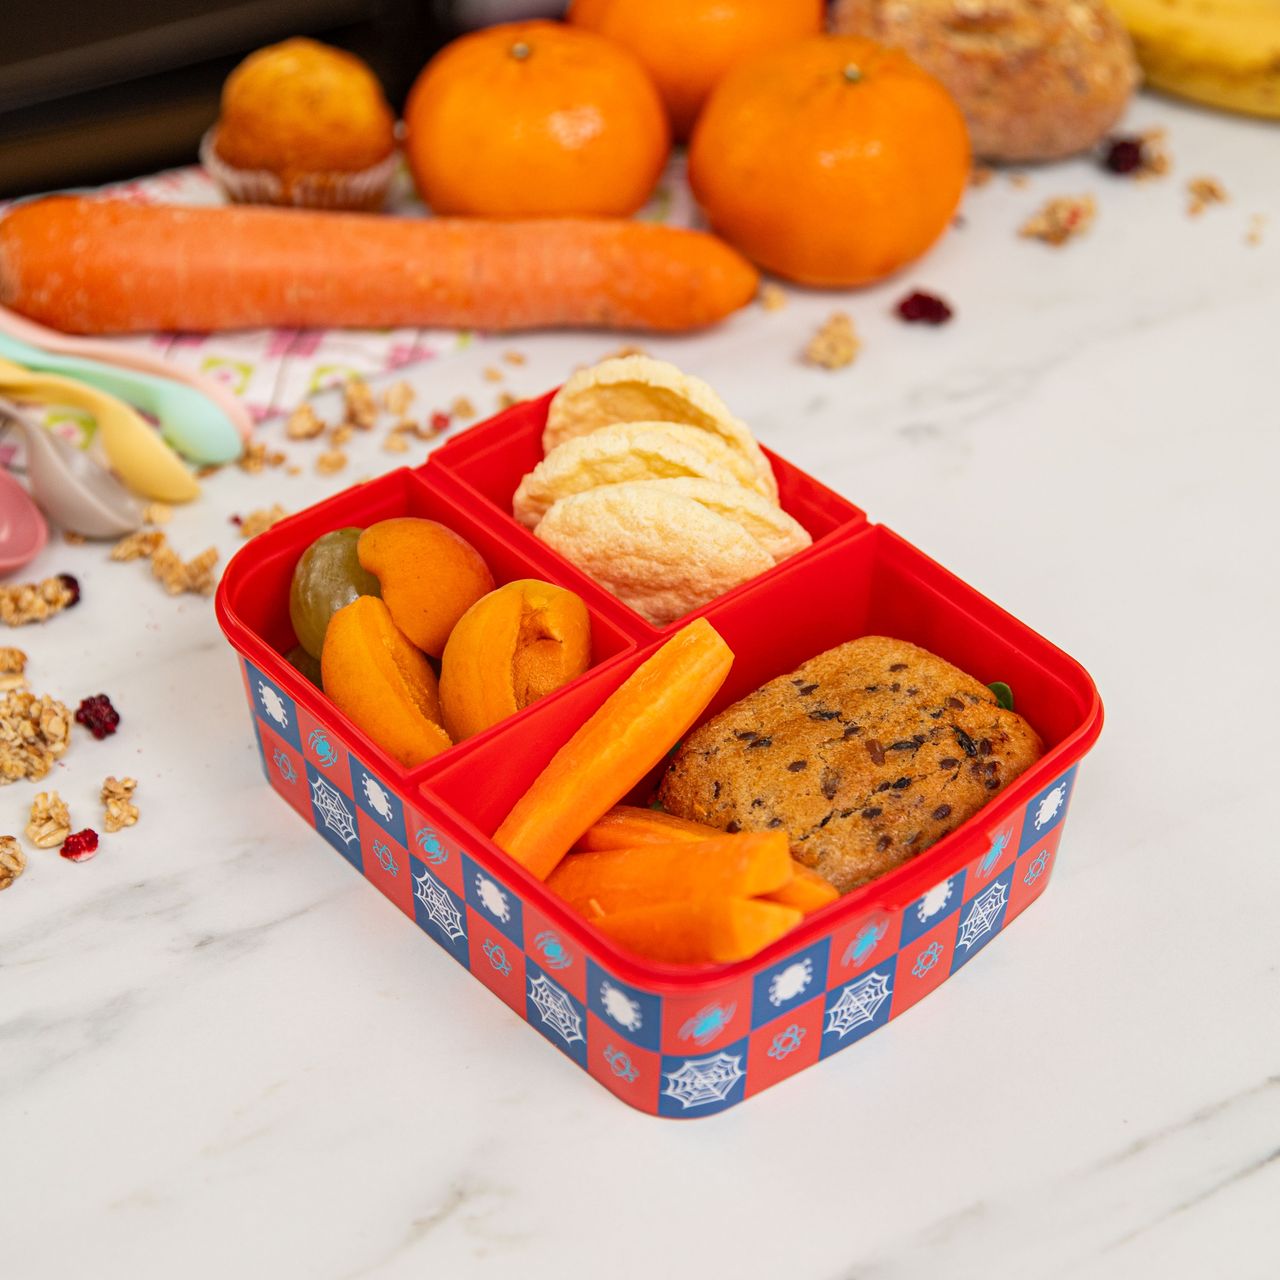 Lunchbox for a child - Delicacies